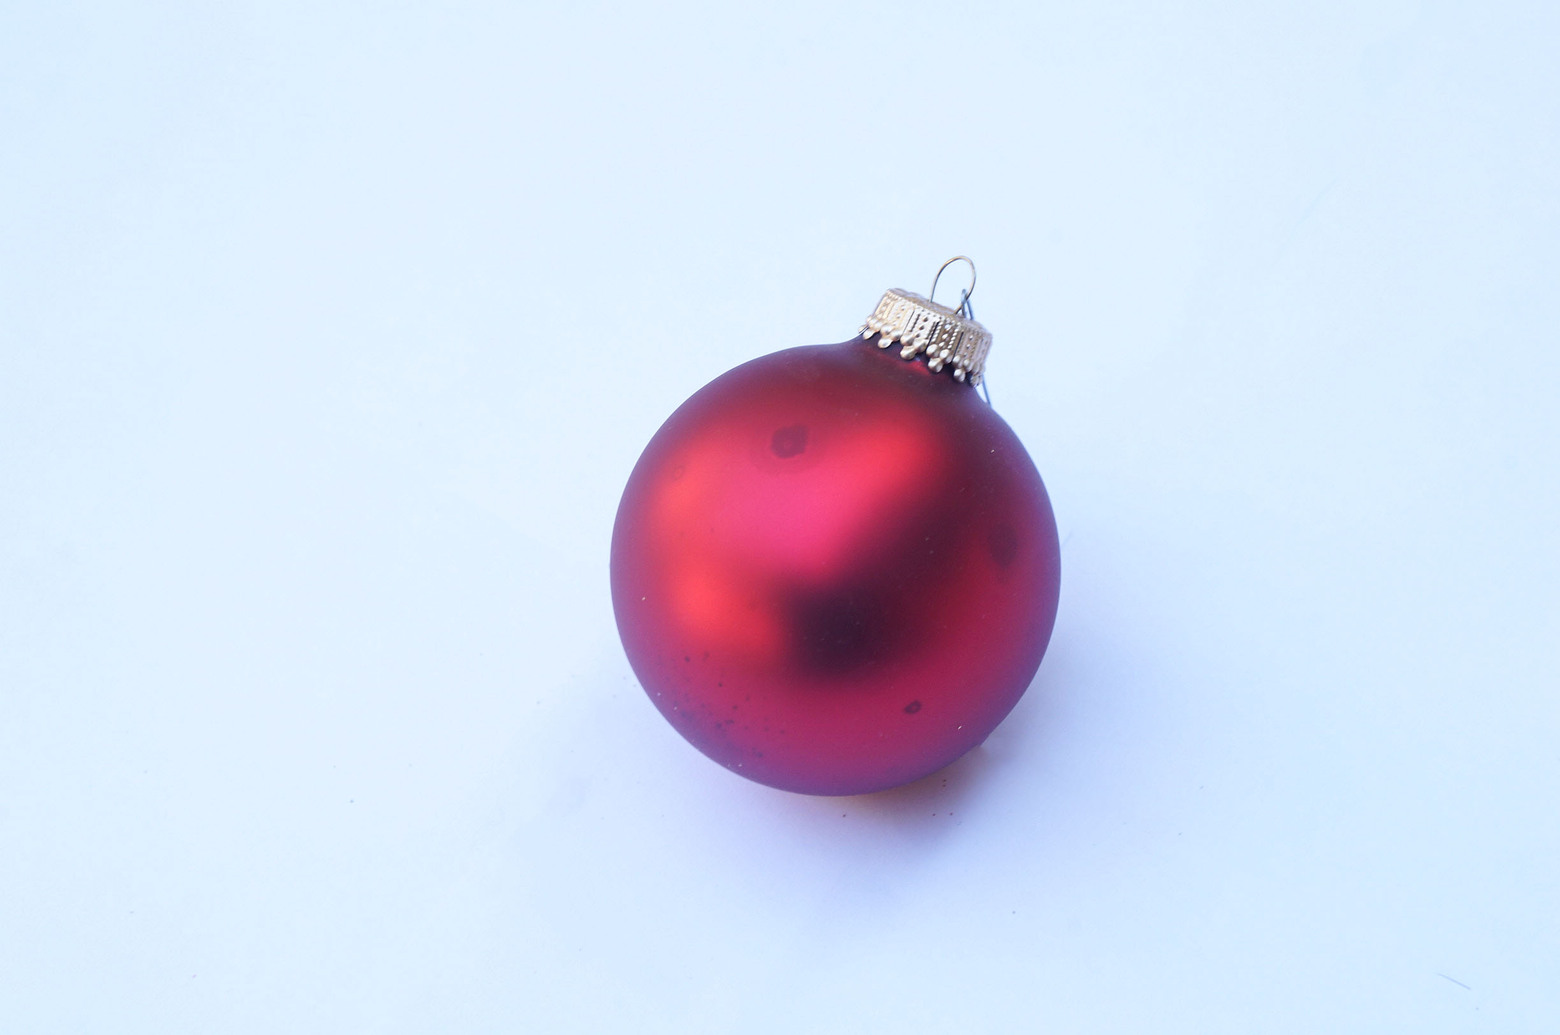 Vintage Blown Glass Christmas Ball Ornament/ヴィンテージ クリスマス オーナメント 吹きガラス ボール レトロ 6個セット 8